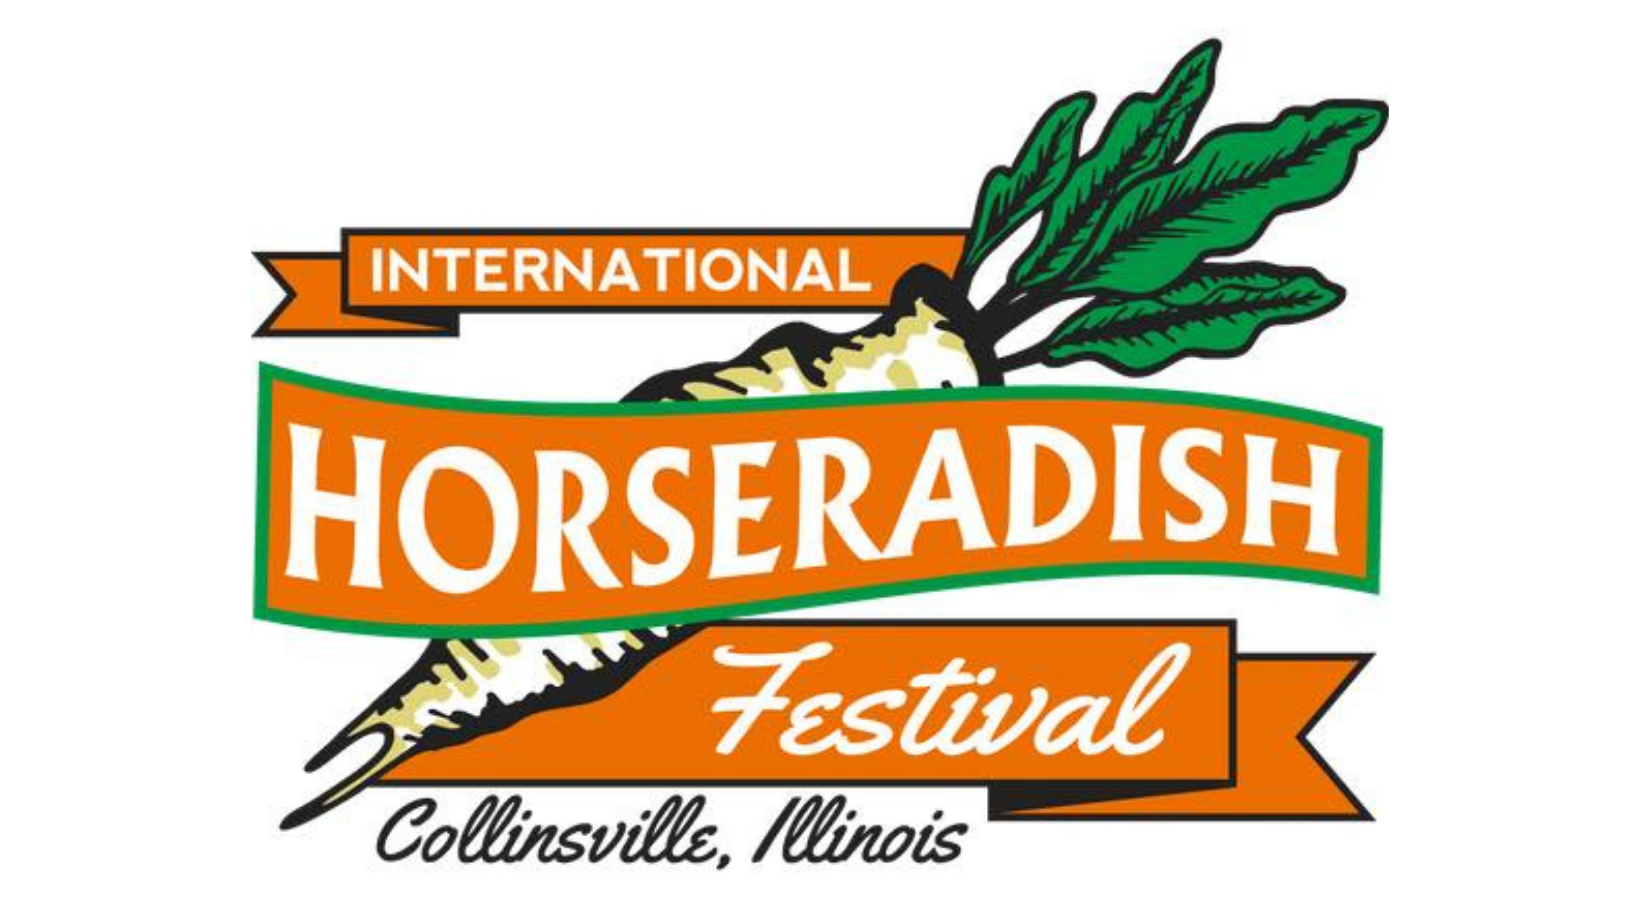 Top 10 Reasons You Should Attend the International Horseradish Festival ... Even If You Don't Like Horseradish